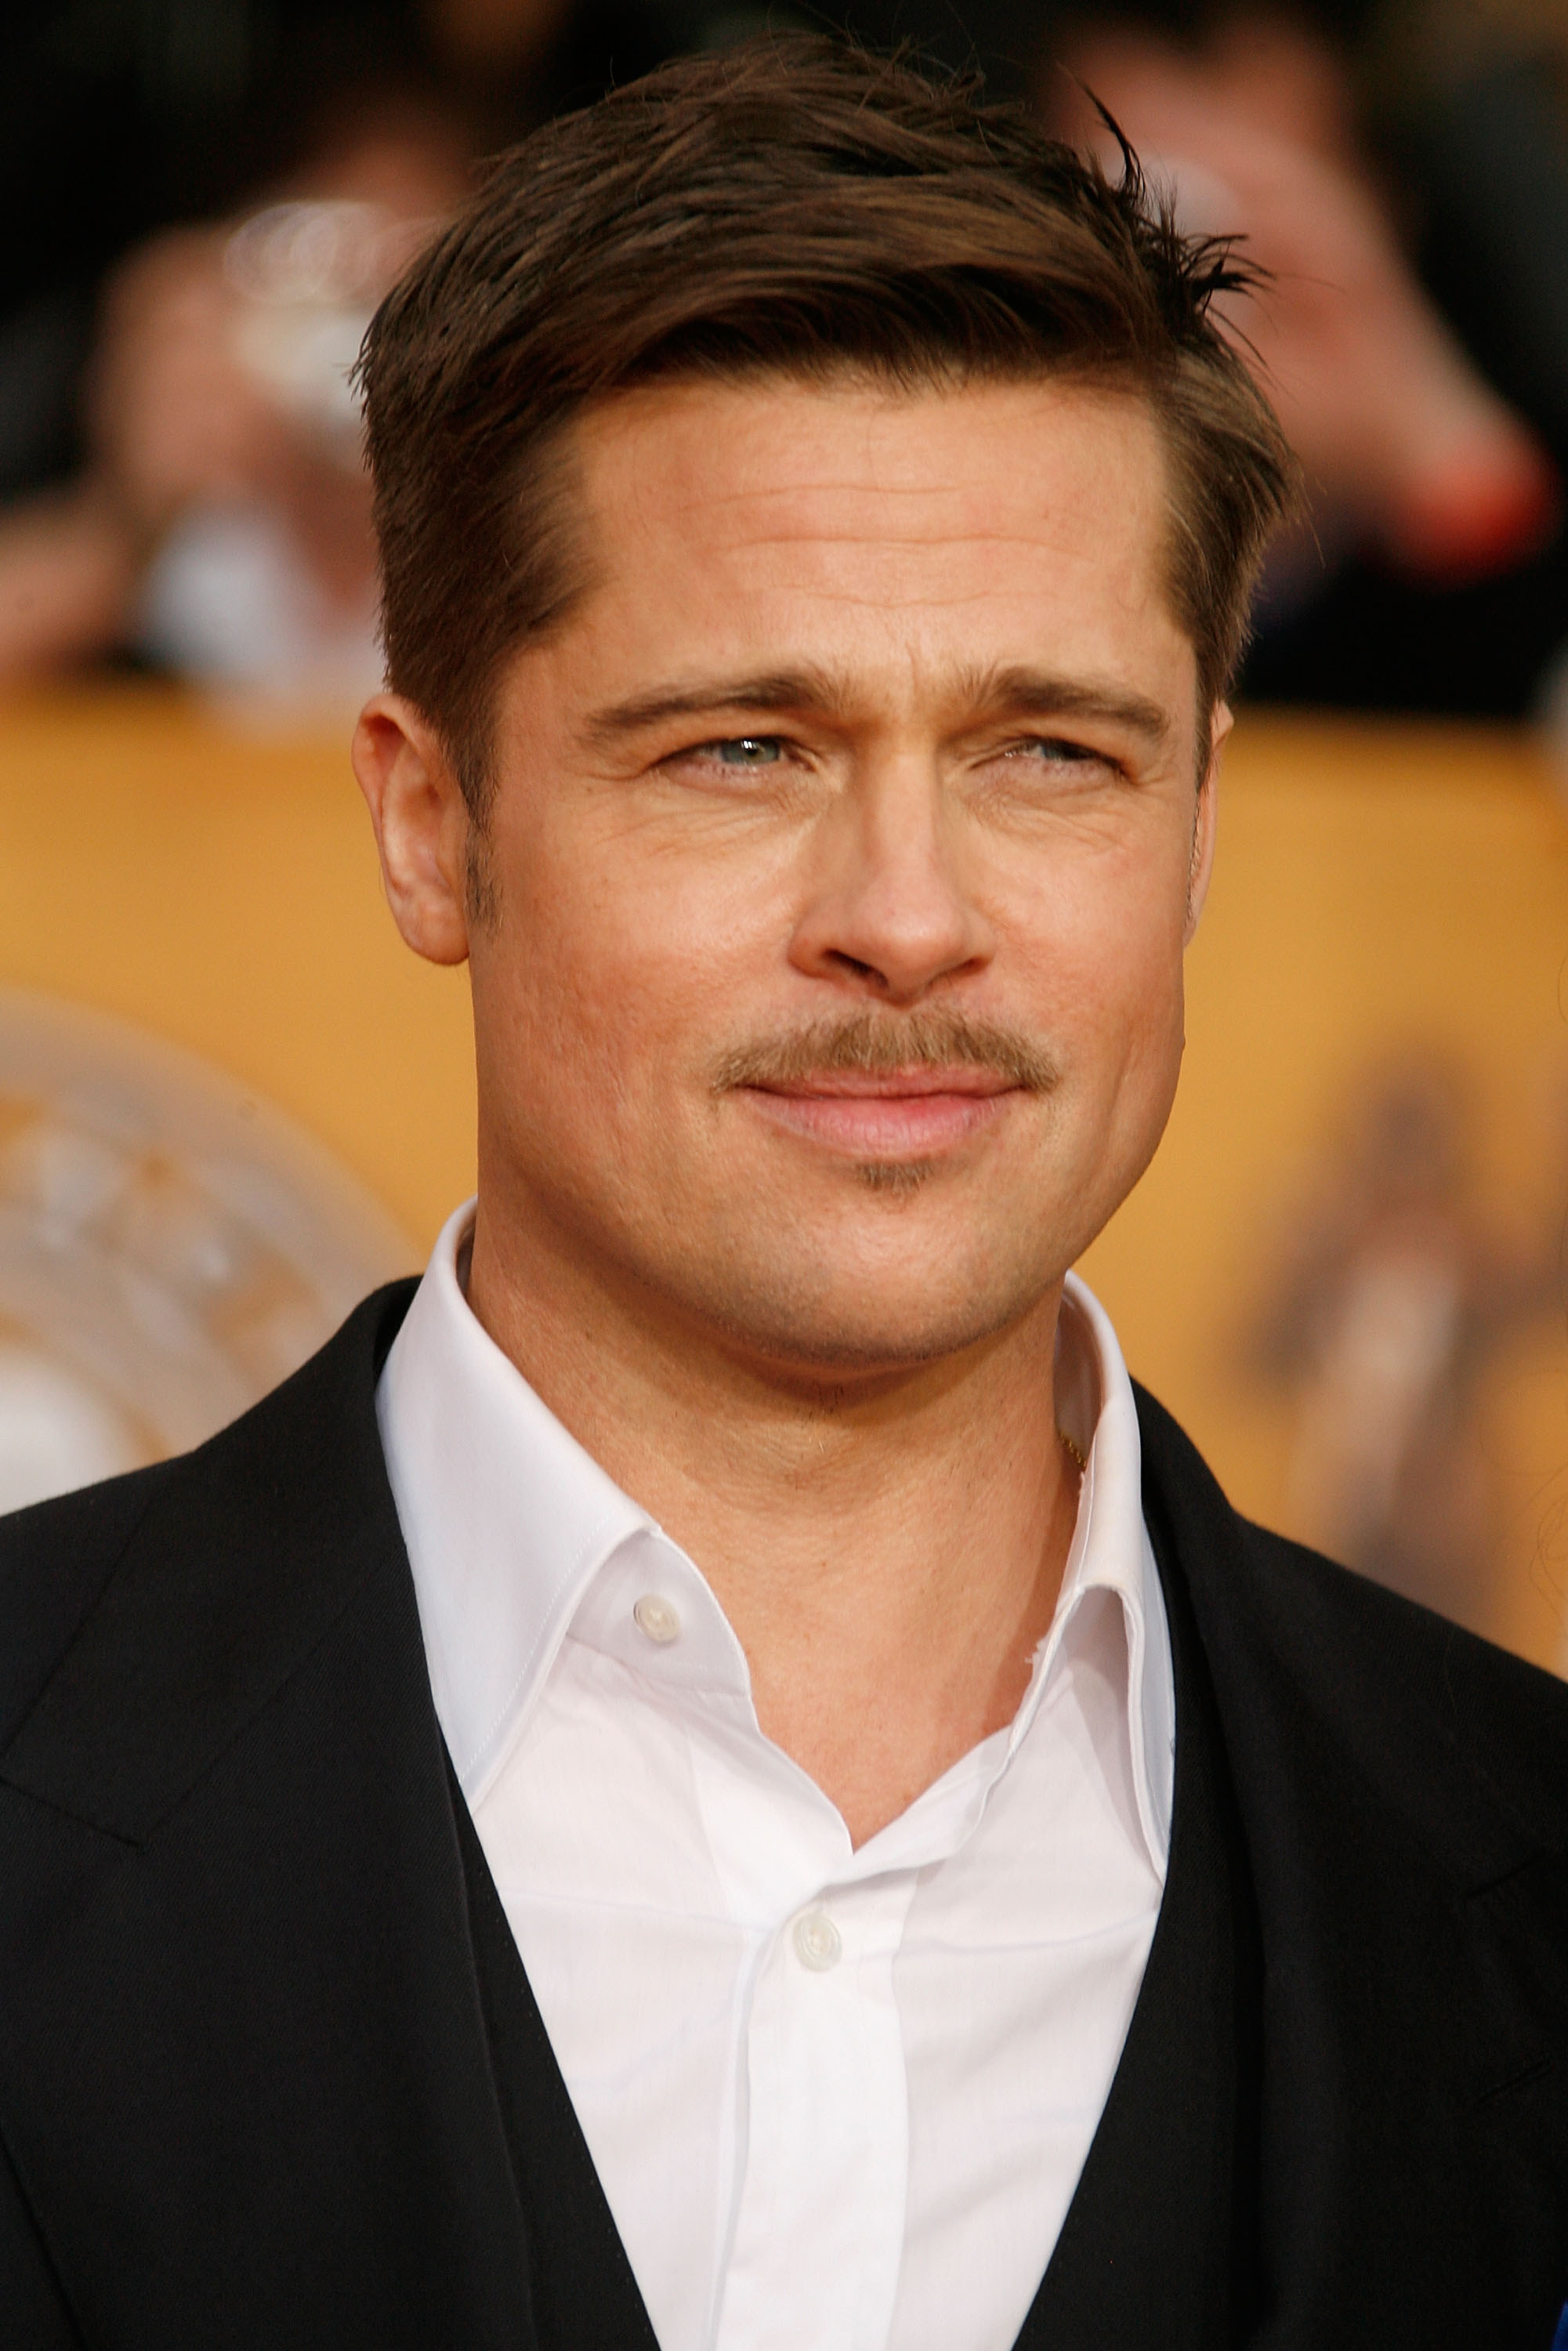 Actor Brad Pitt arrives at the 15th Annual Screen Actors Guild Awards held at the Shrine Auditorium